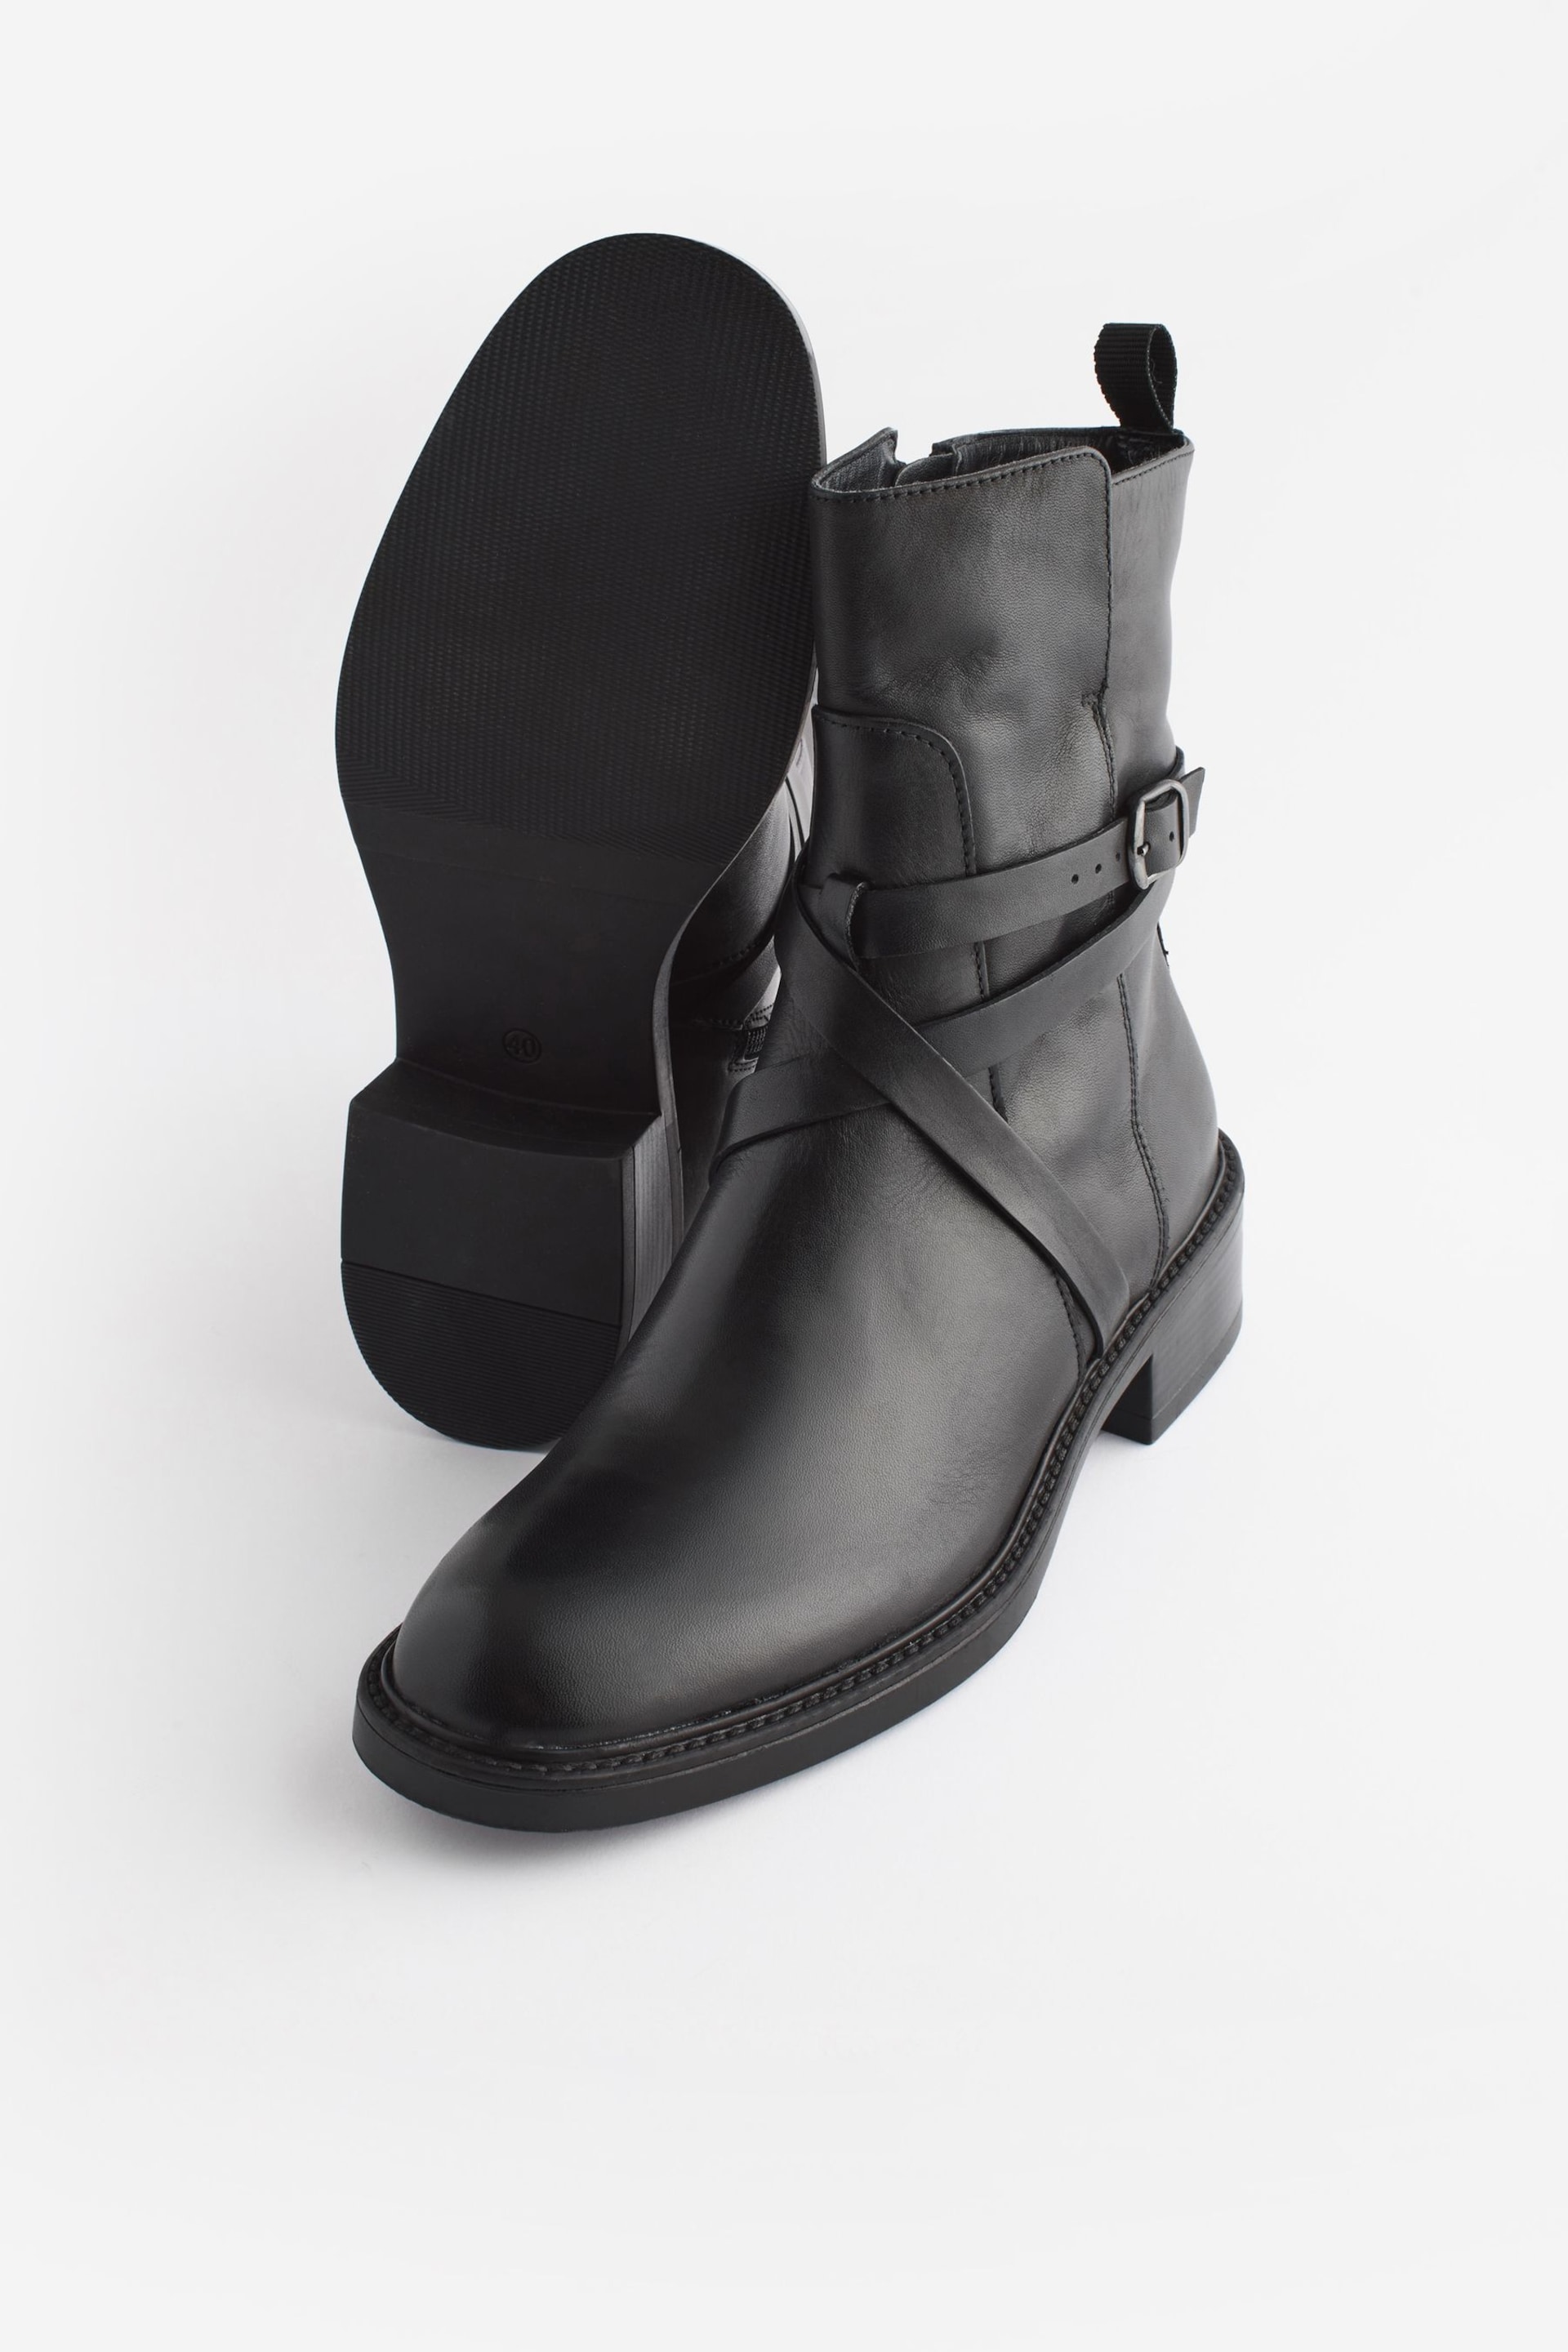 Black Signature Leather Strap Detail Ankle Boots - Image 5 of 10